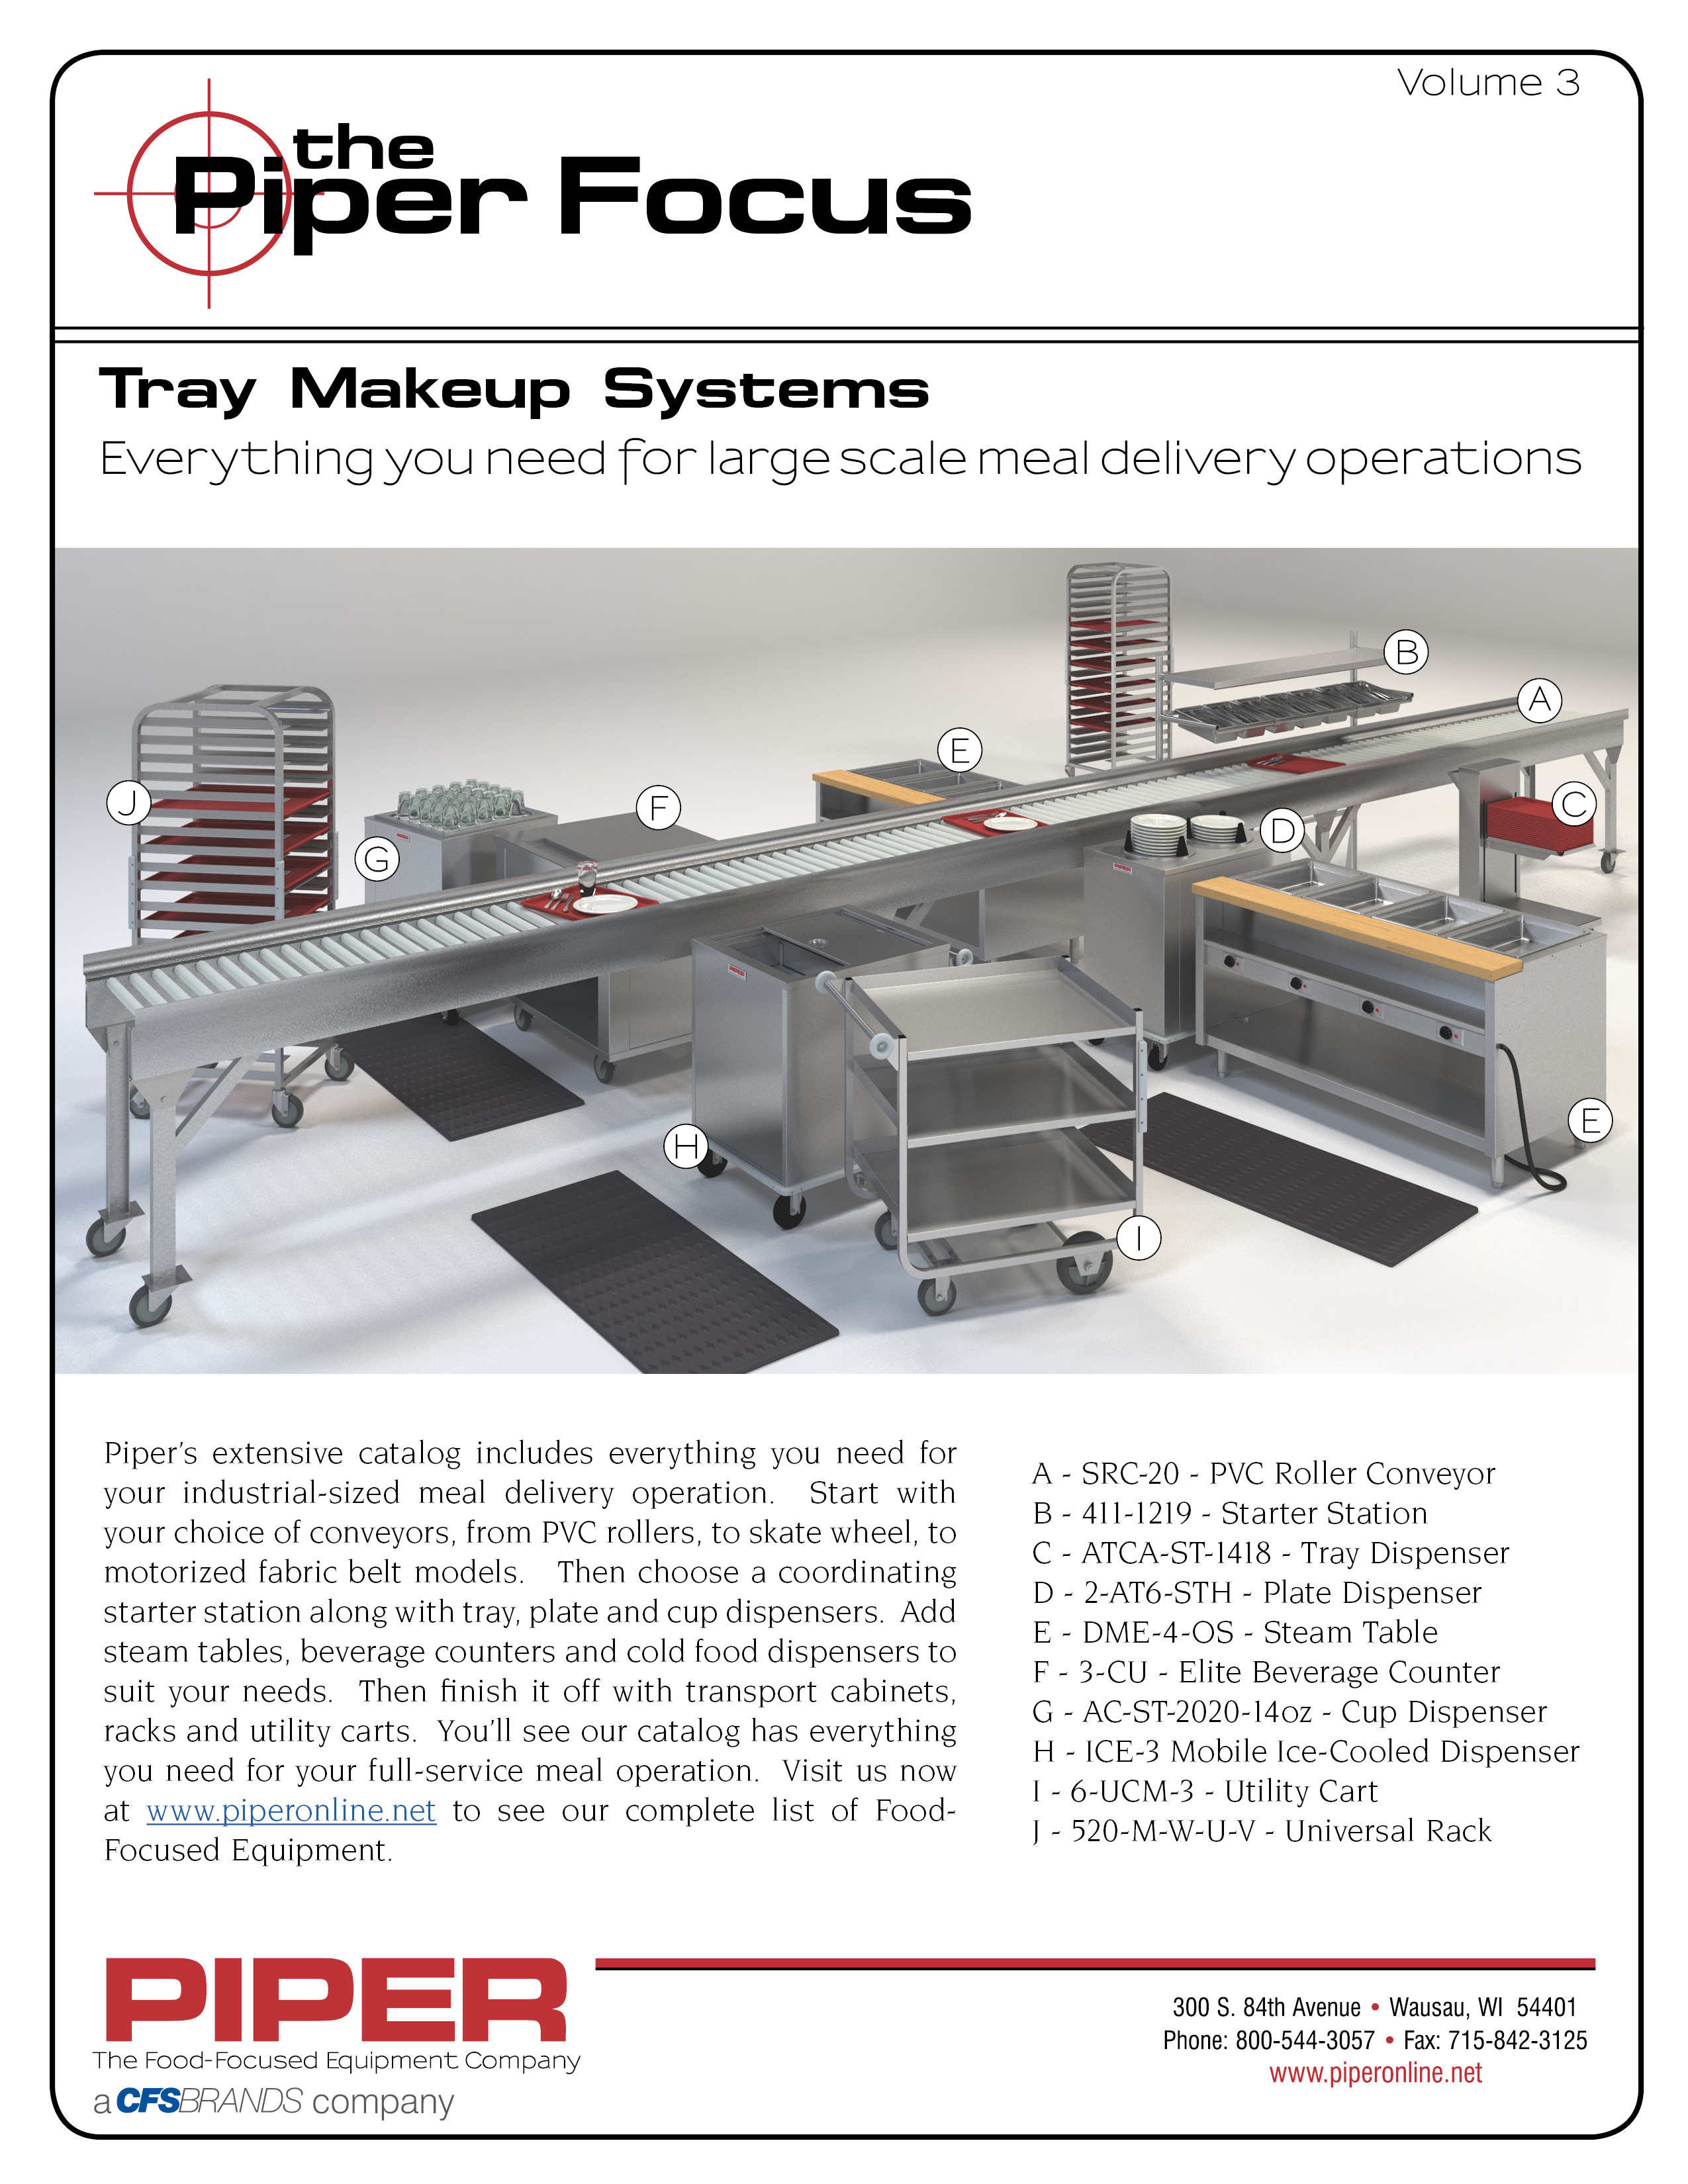 Piper Focus - Tray Makeup Systems